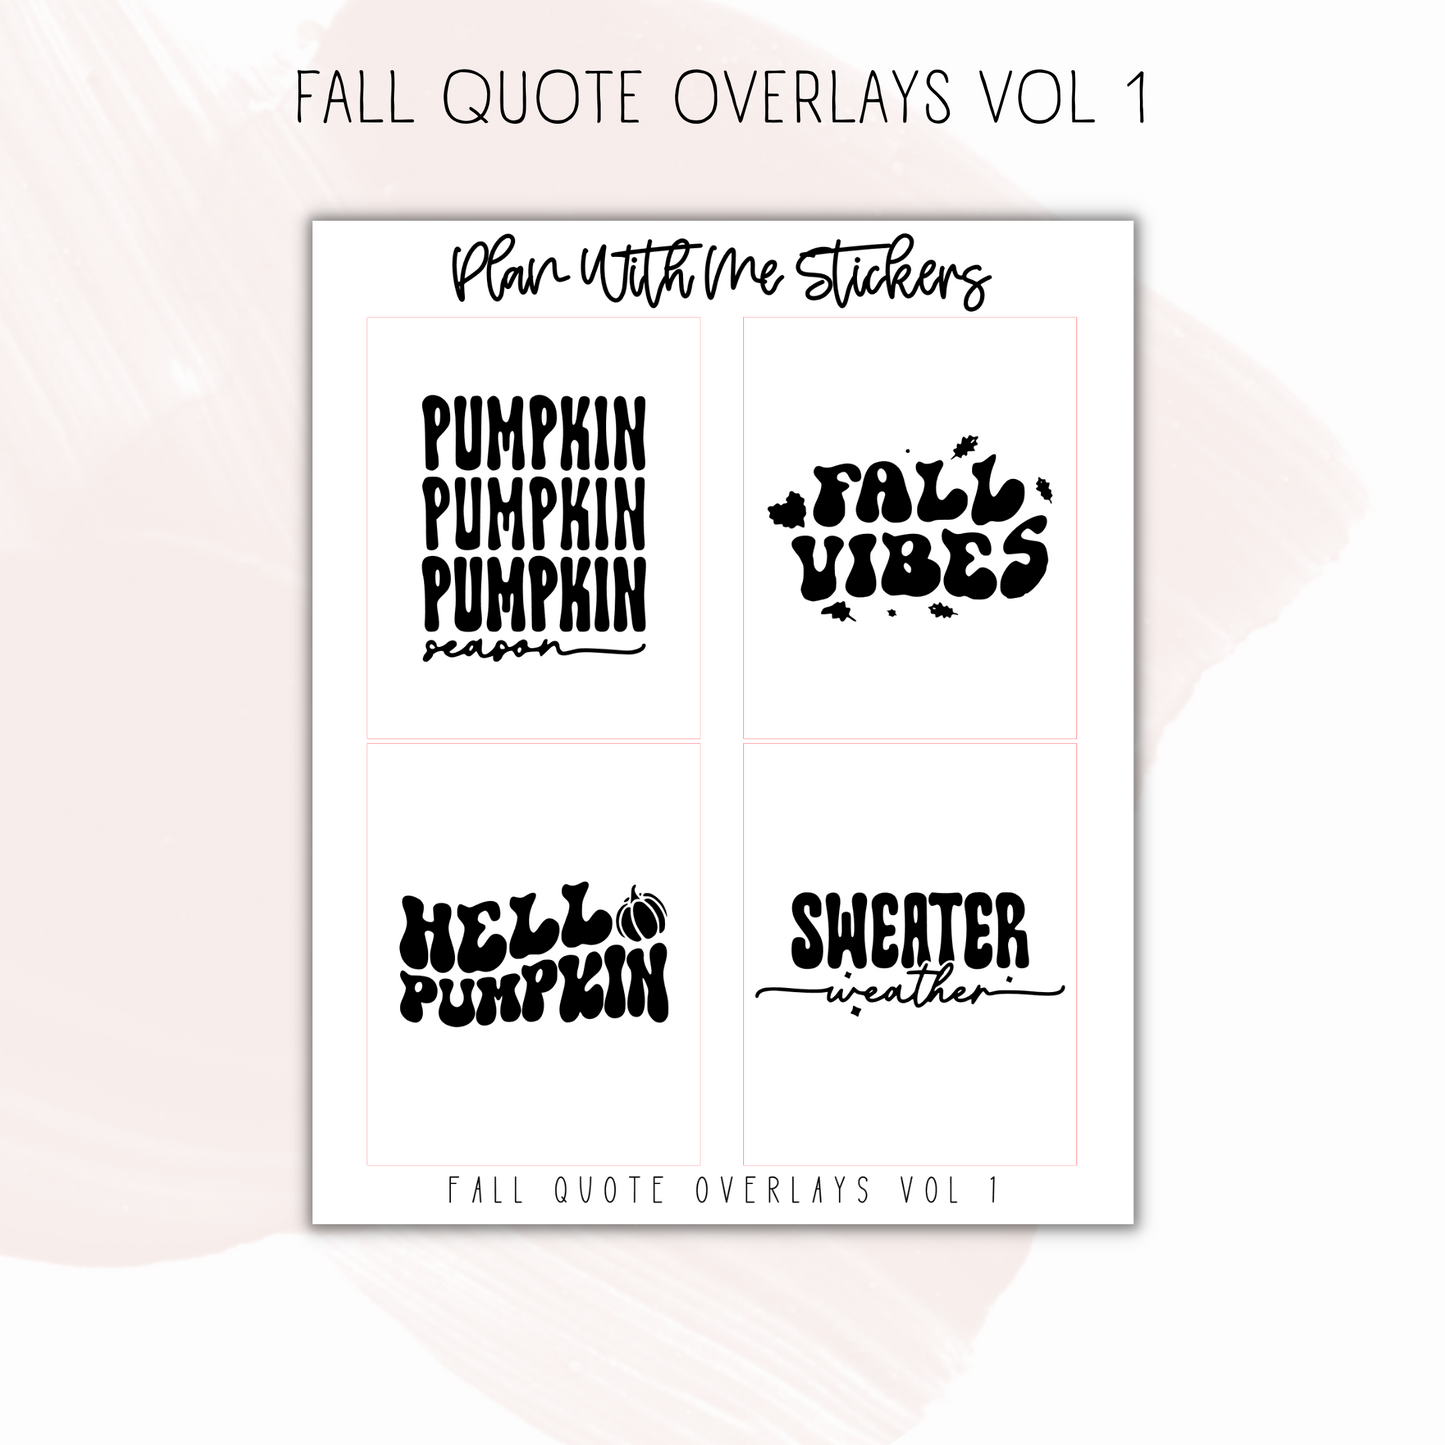 Fall Quote Overlays Vol 1